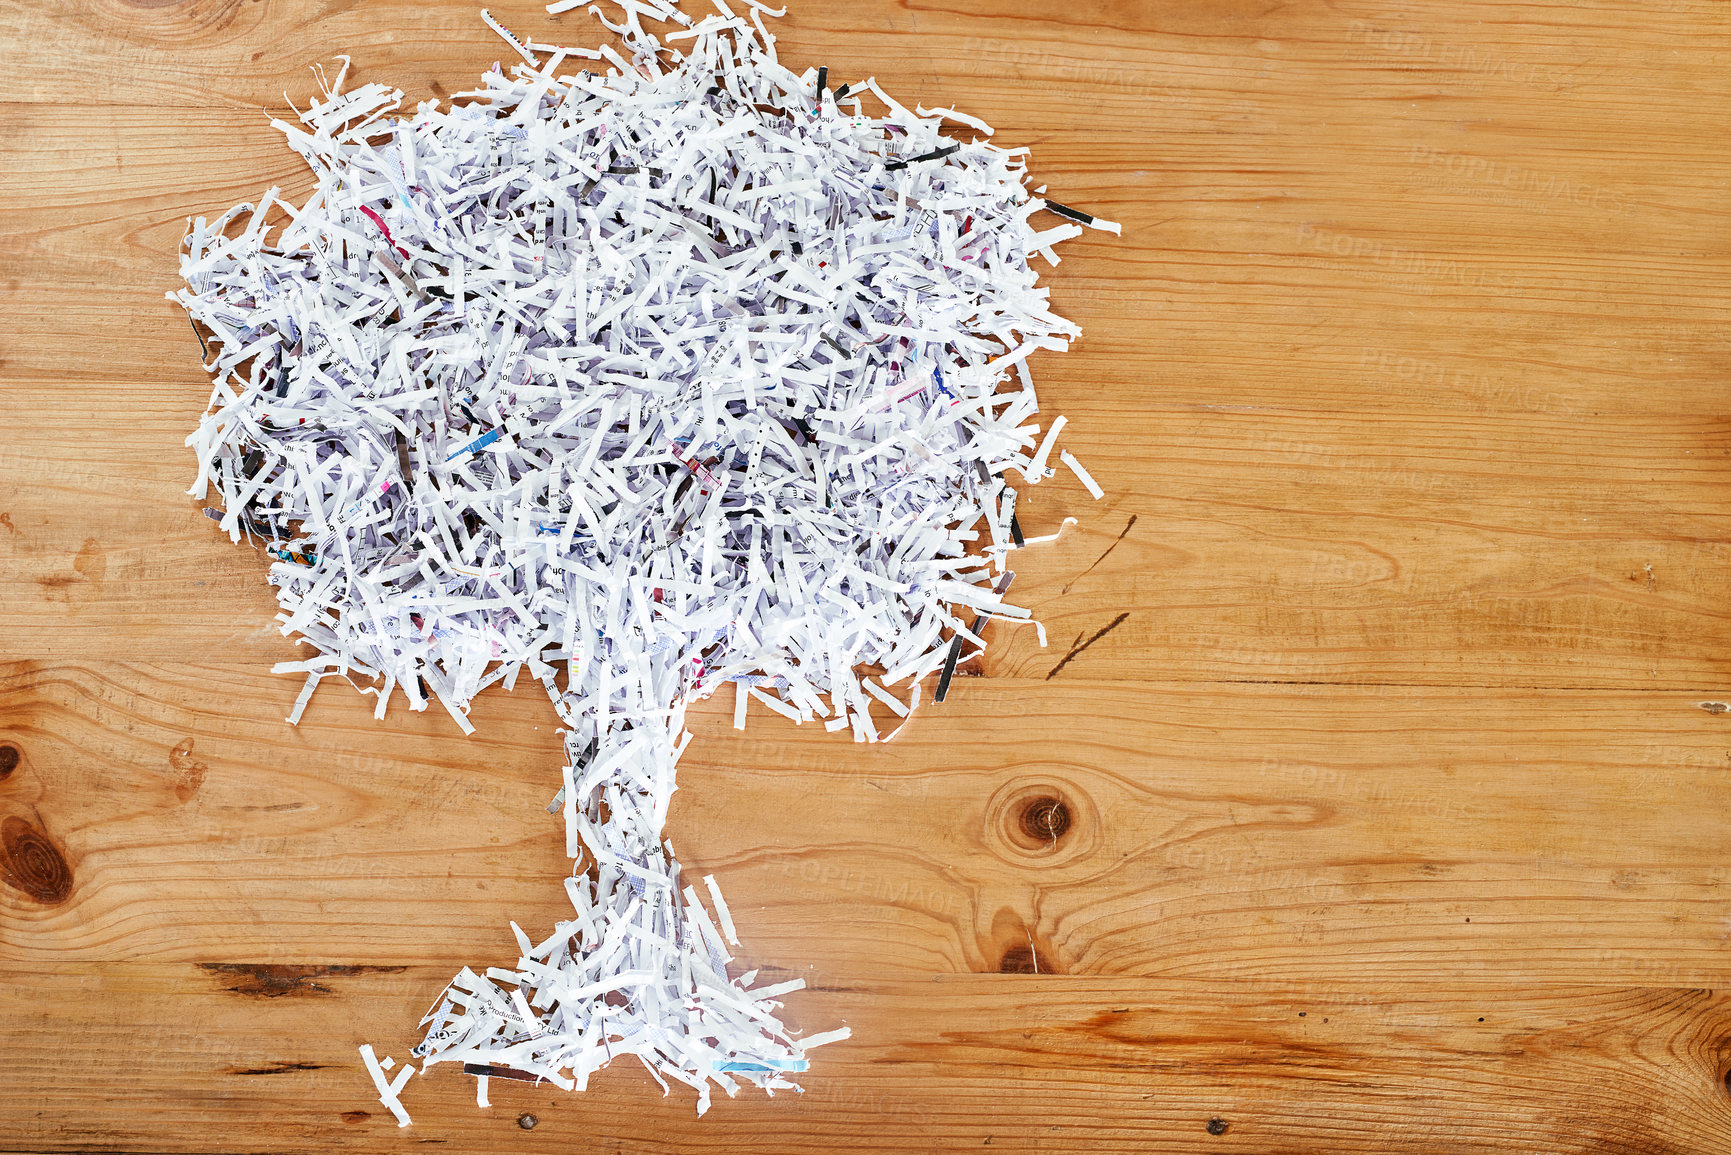 Buy stock photo Studio shot of shredded paper arranged in the shape of a tree on a wooden table